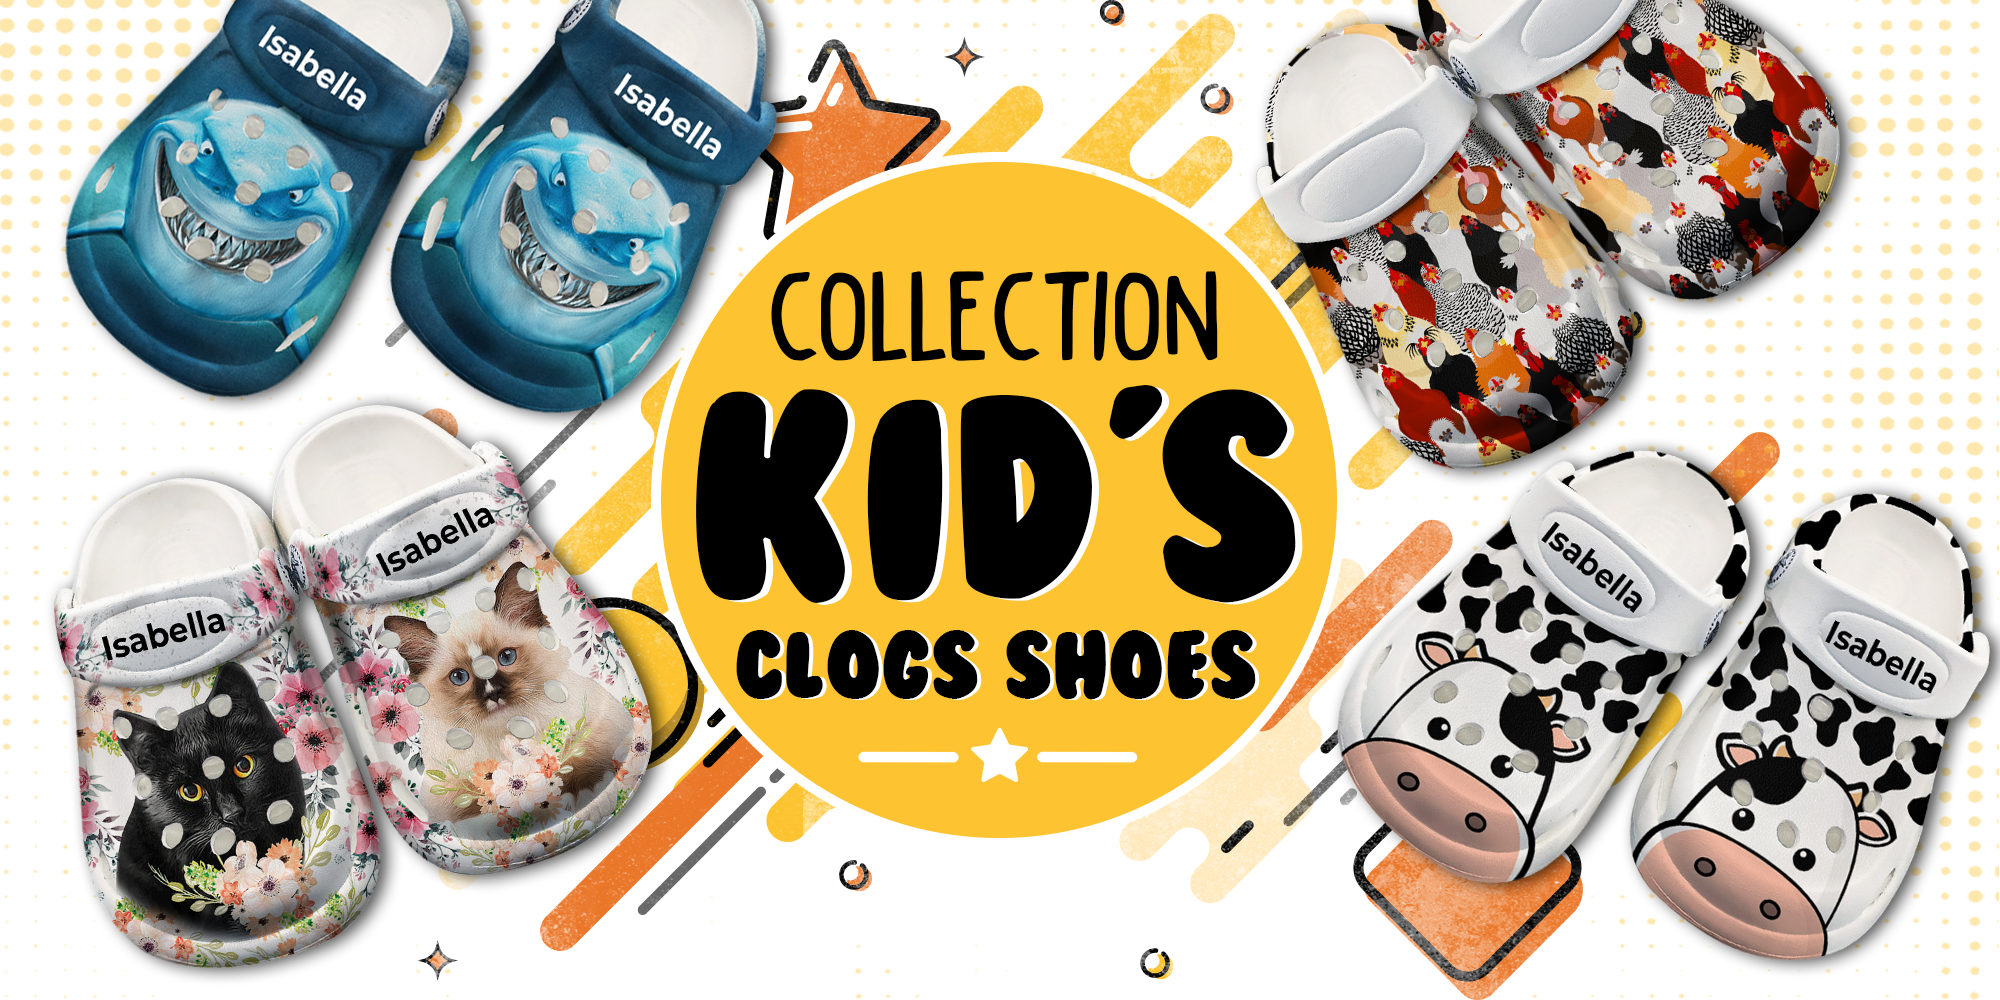 Kids Clogs Shoes are now available!